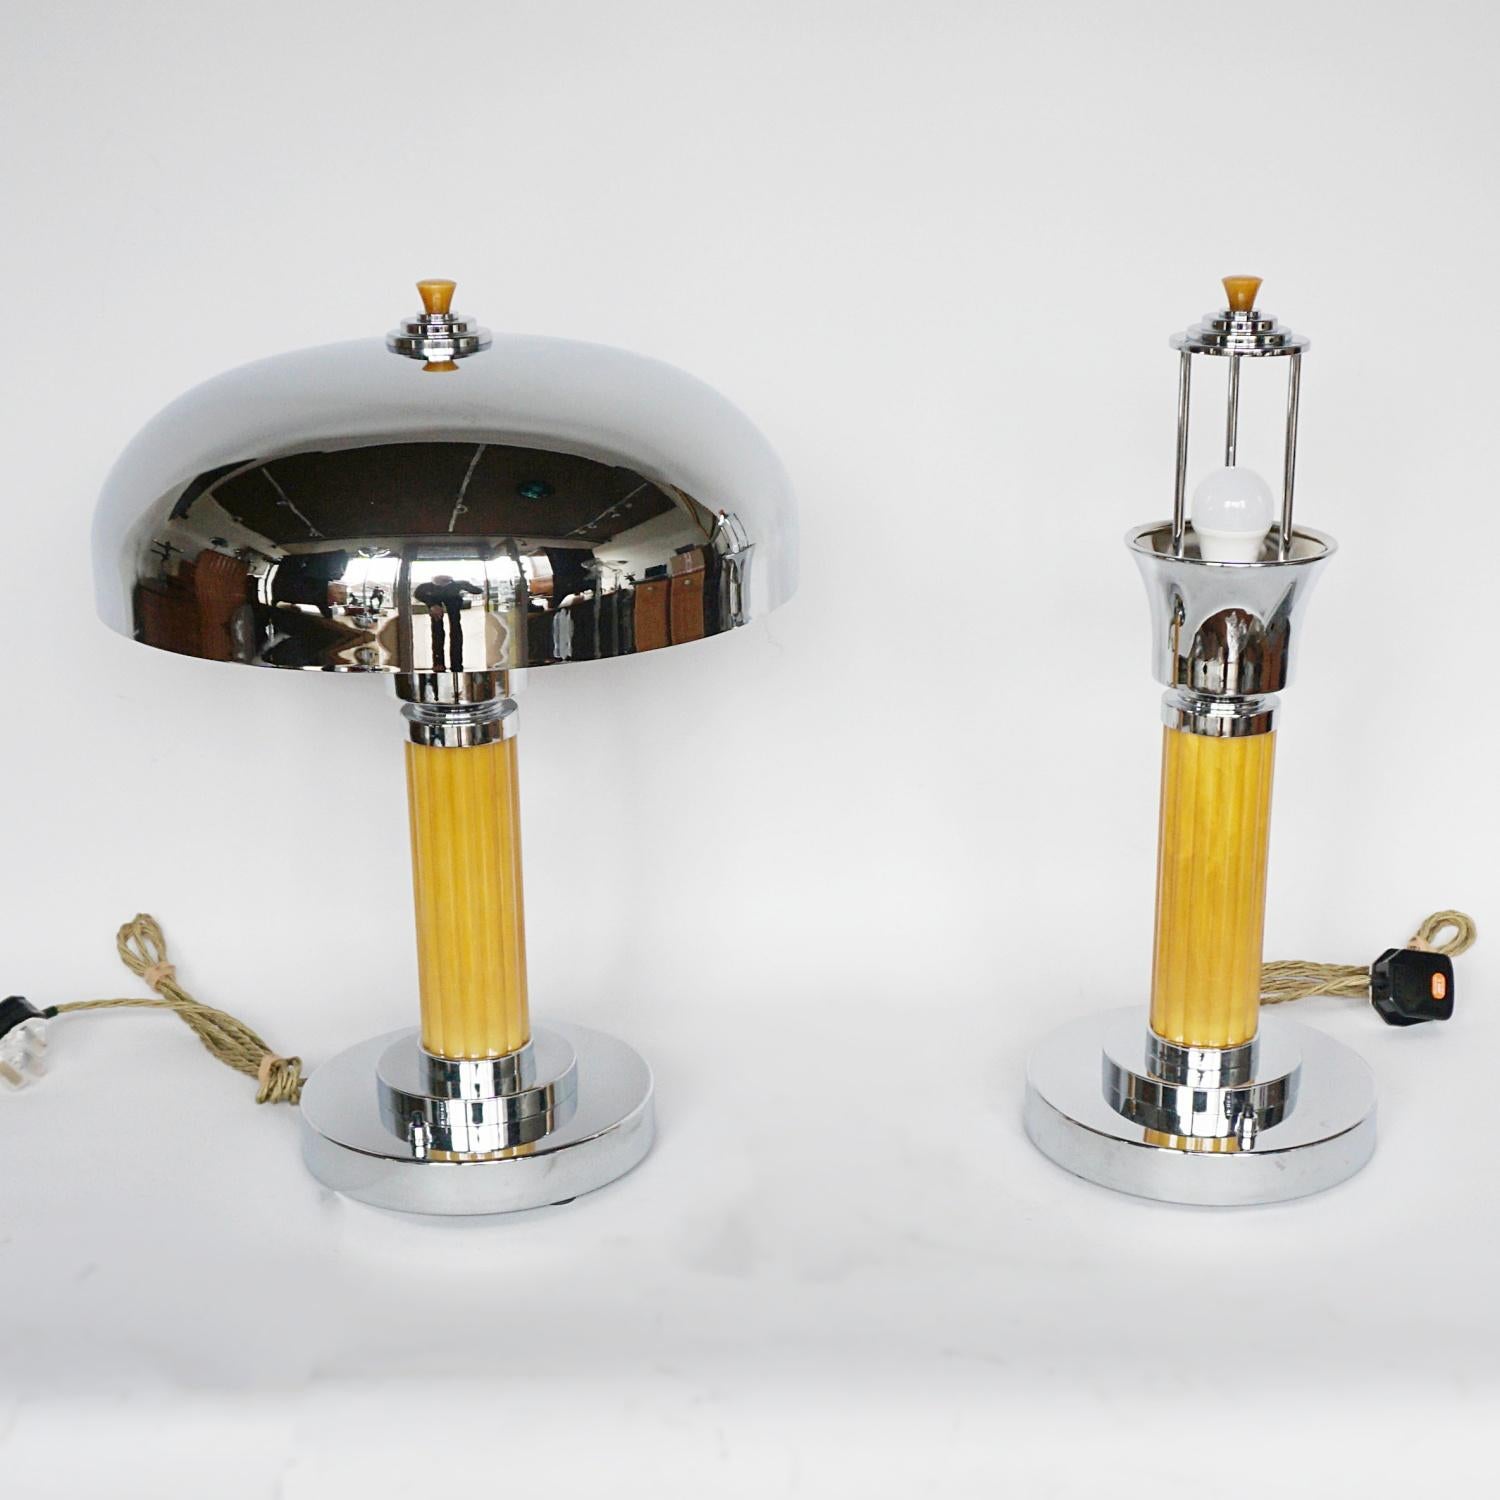 A pair of Art Deco dome lamps. Thick, reeded yellow bakelite stem over a stepped circular base with a chromed metal dome shade. Bakelite finial to top. 

Dimensions: H 50cm D 36cm 

Origin: English

Item Number: 1003221

All of our lighting